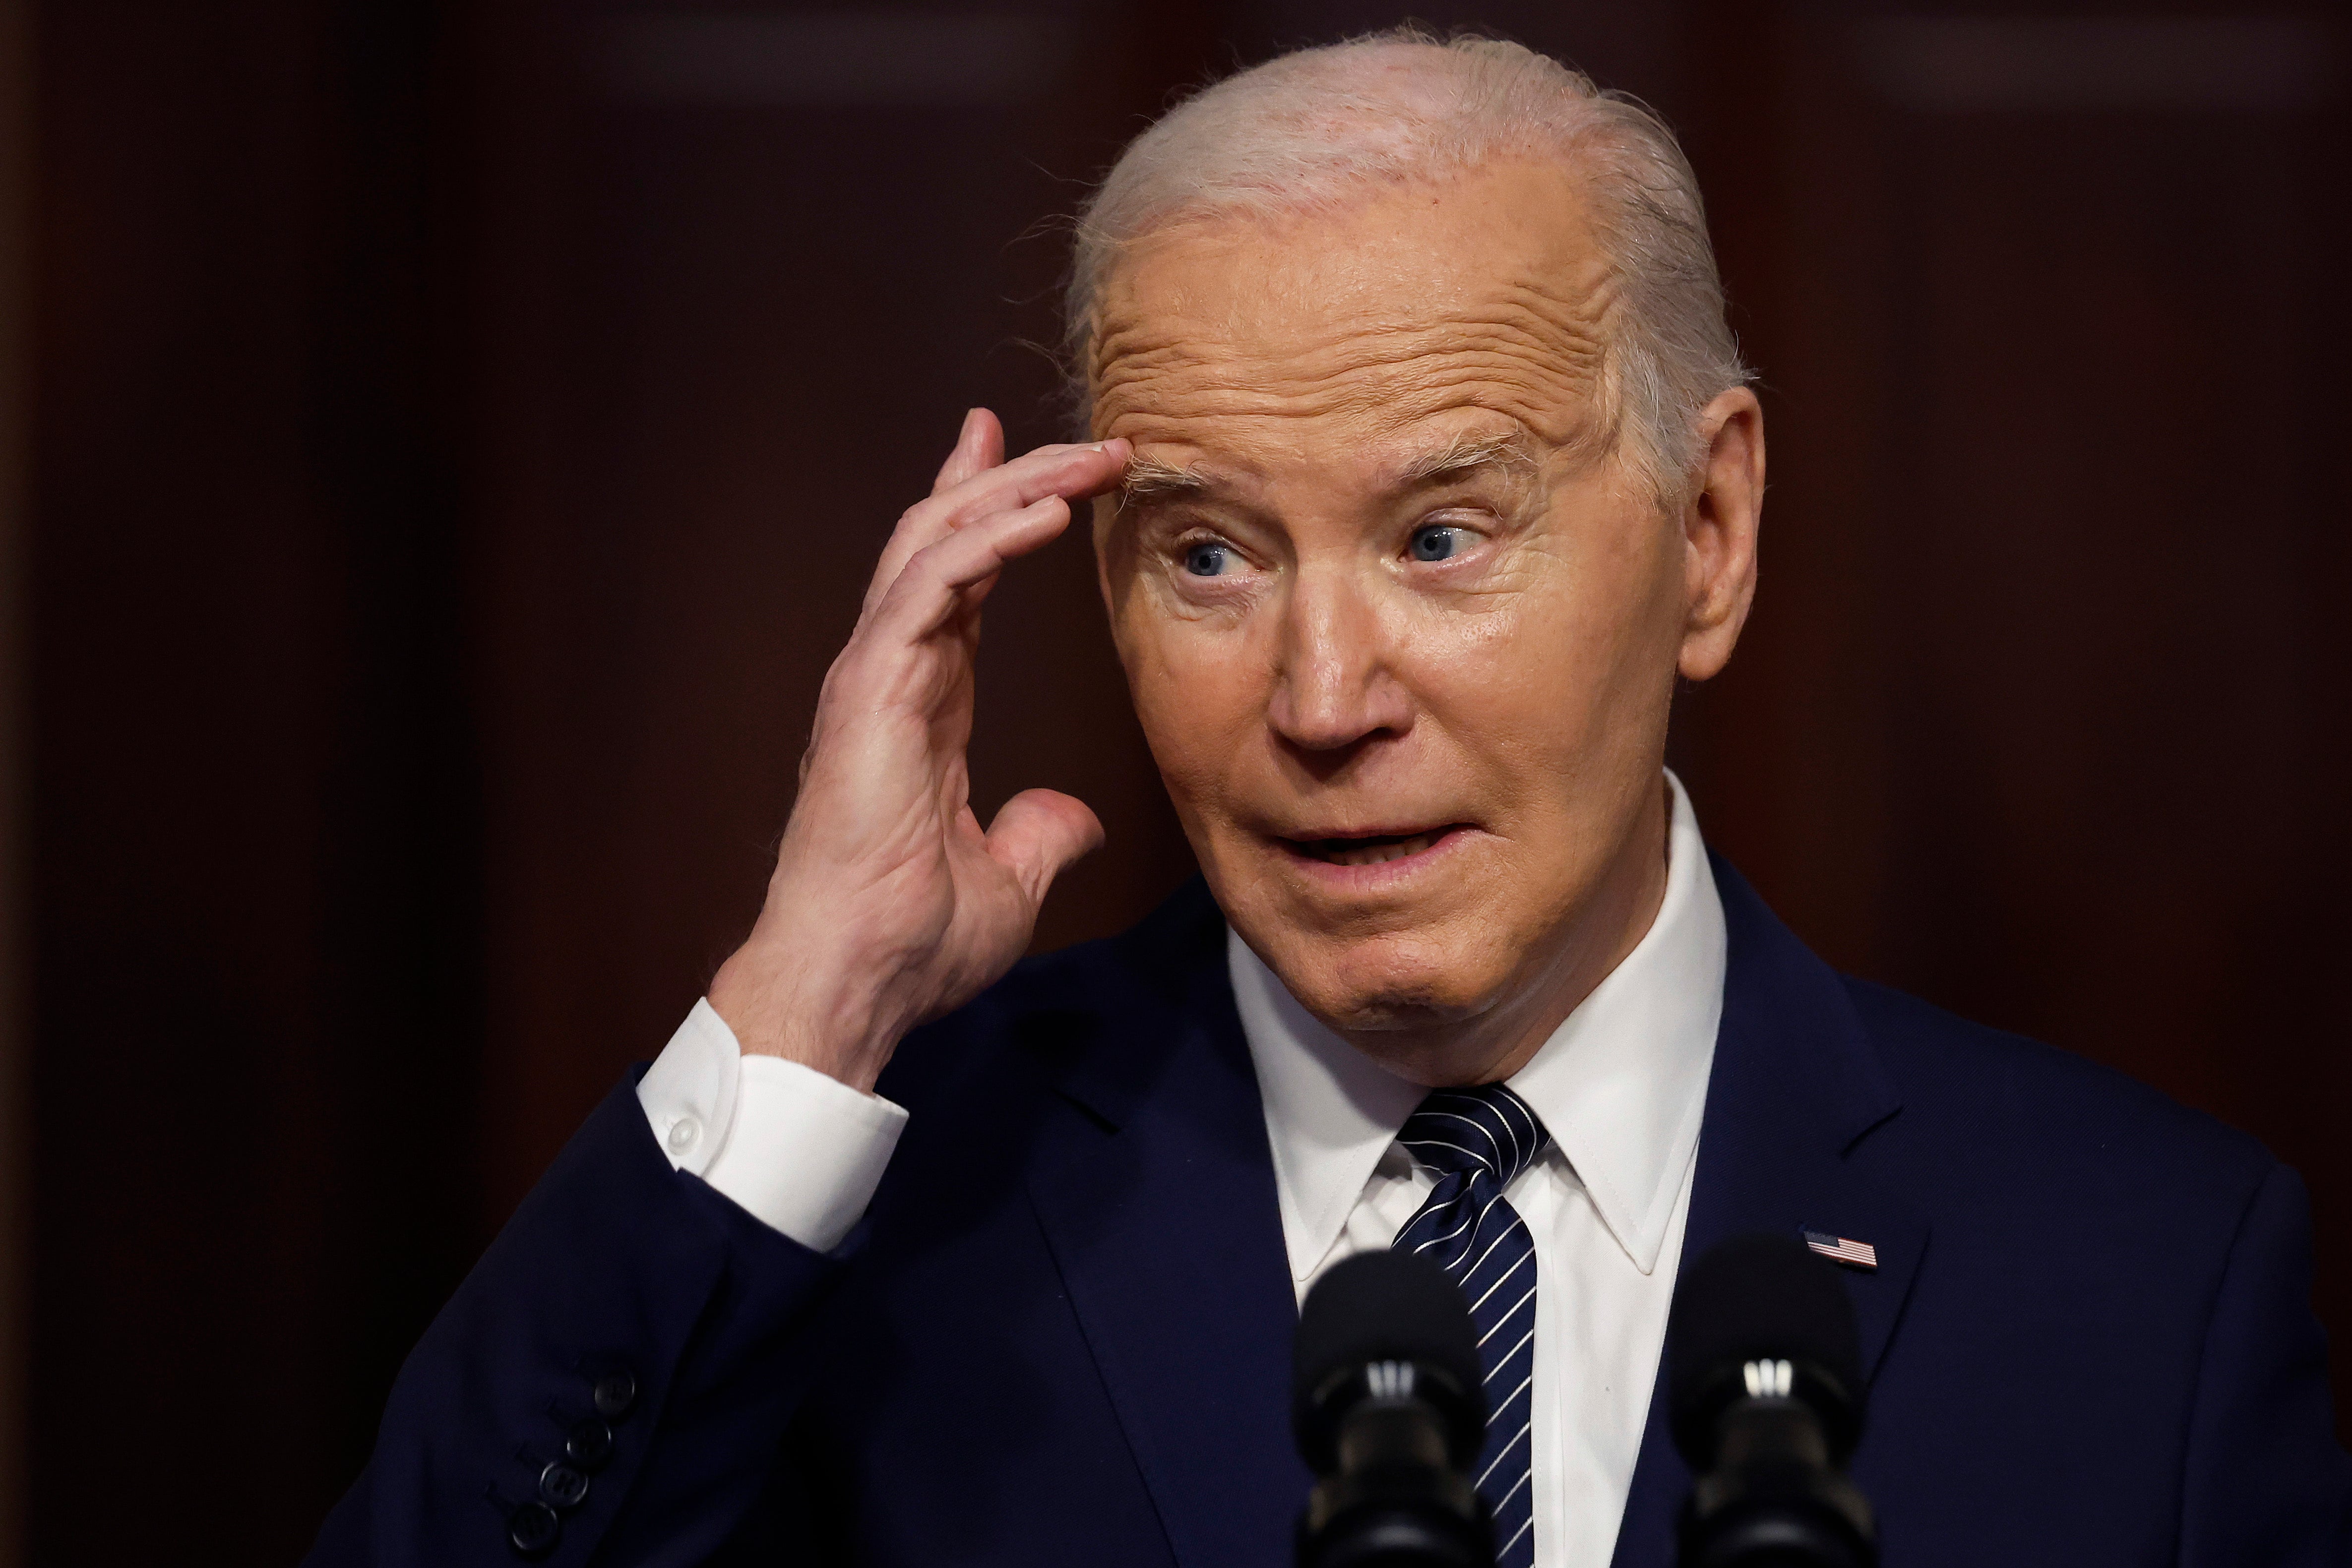 Joe Biden could be replaced as the party’s presidential nominee at the Democratic National Convention in August